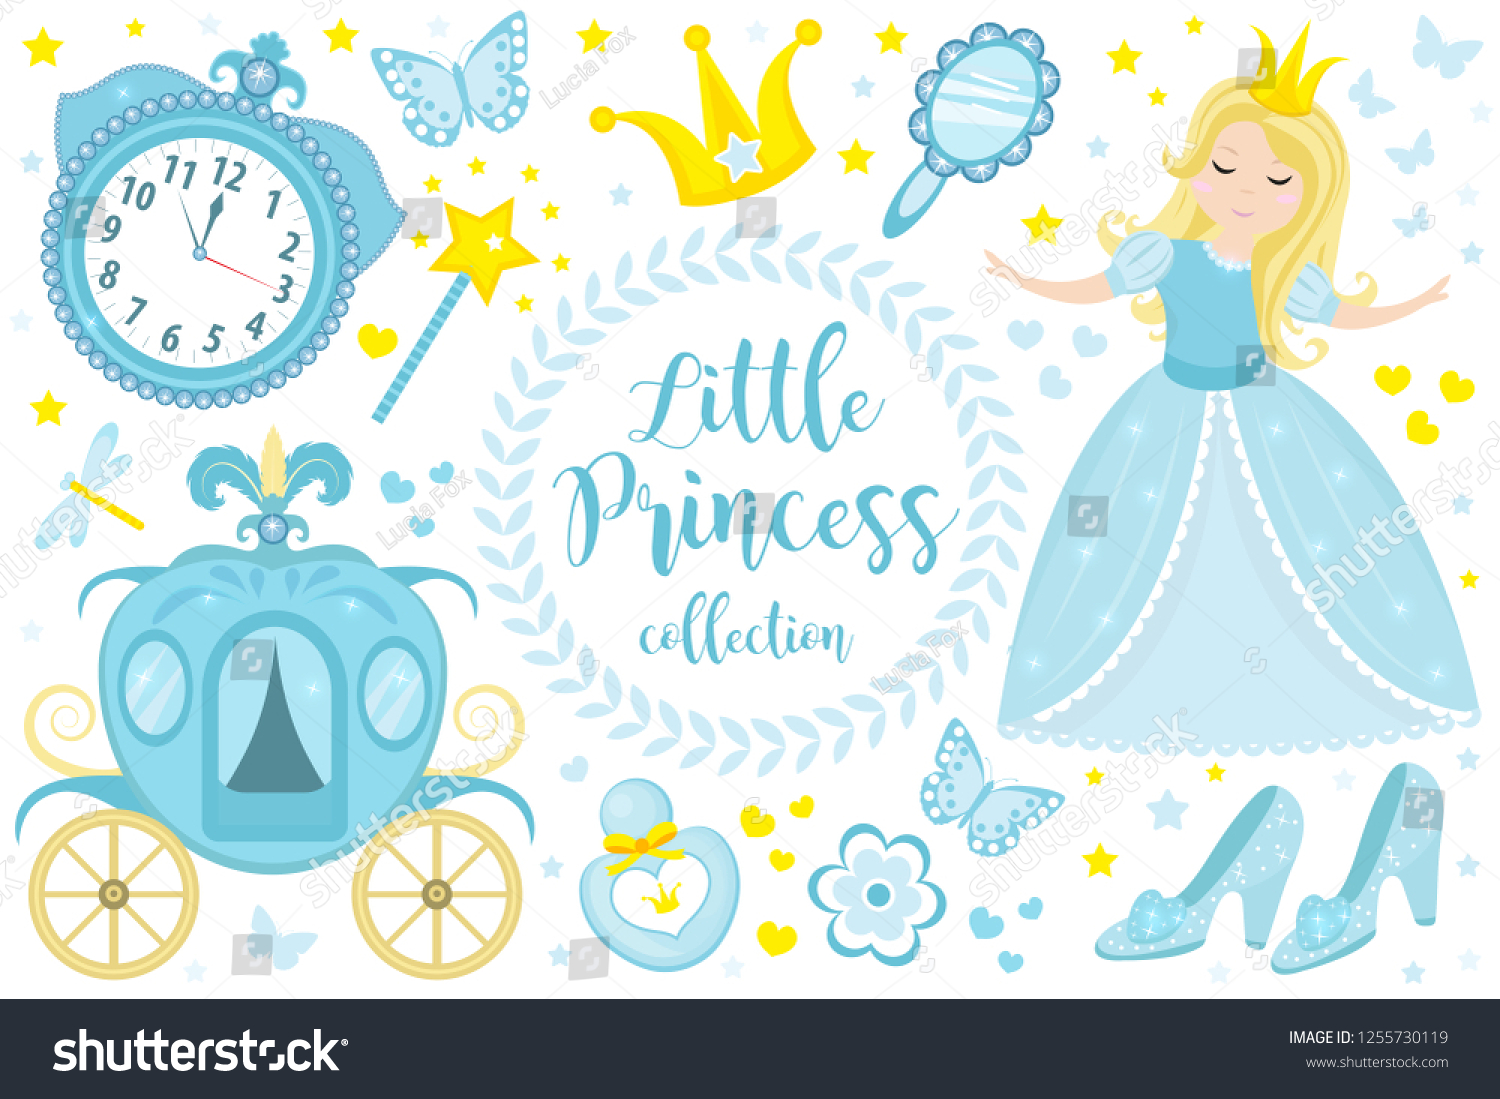 SVG of Cute little princess Cinderella set objects. Collection design element with pretty girl, carriage, watch, mirror, accessories. Kids baby clip art funny smiling character. Vector iillustration svg